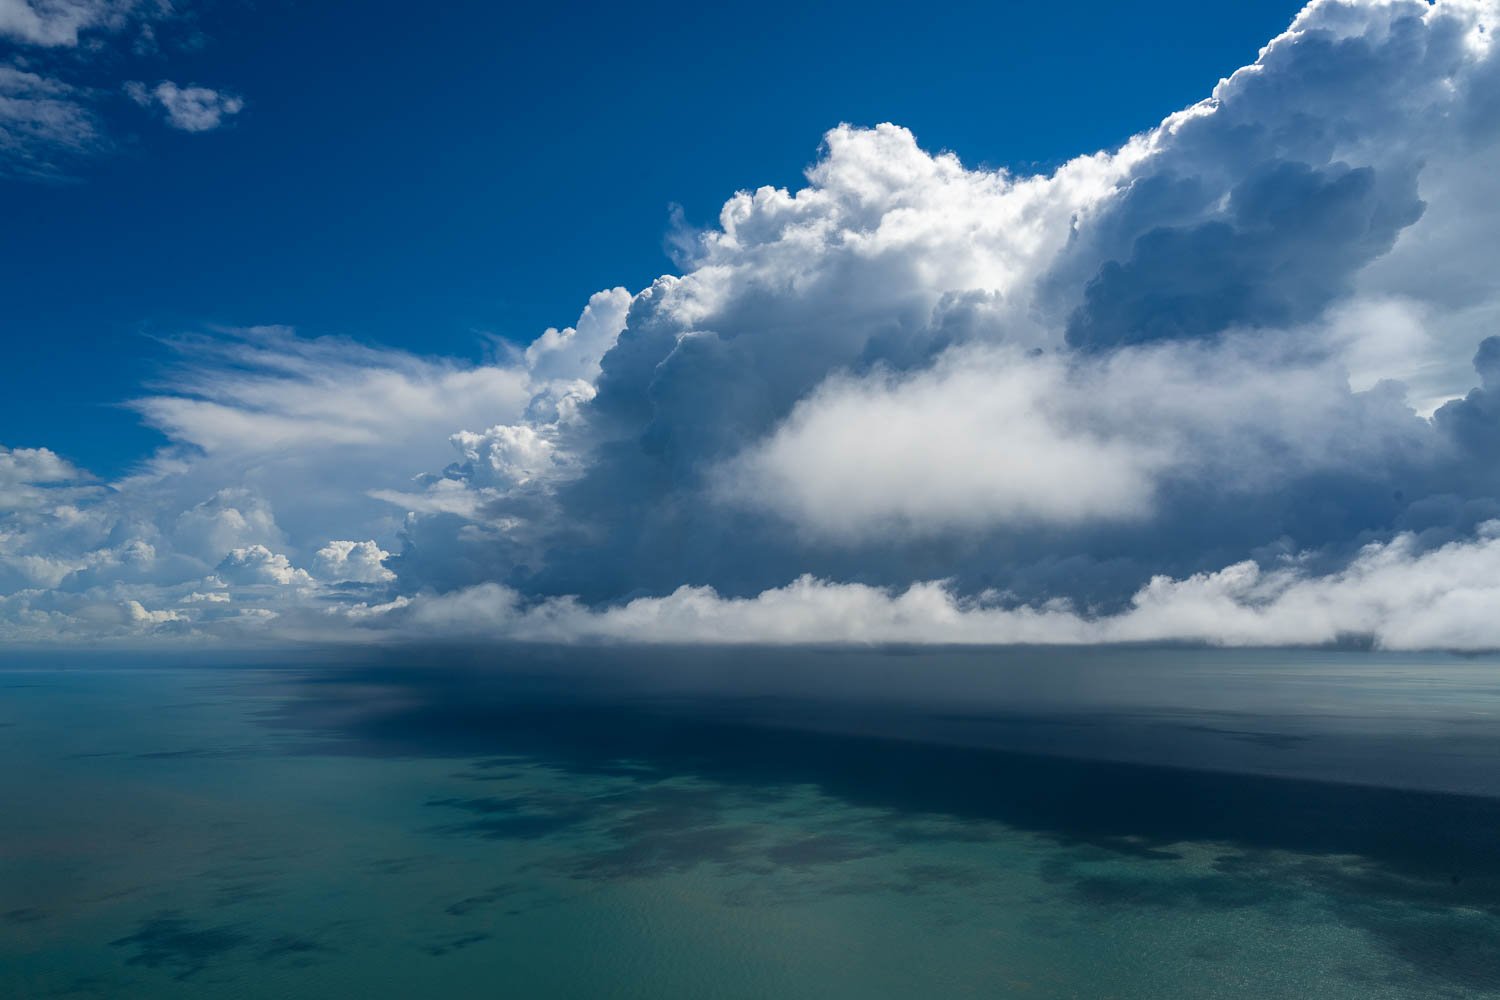 A giant smoky cloud just over the deep sea-green ocean stopping the shiny sunlight, Cloud Front, The Kimberley